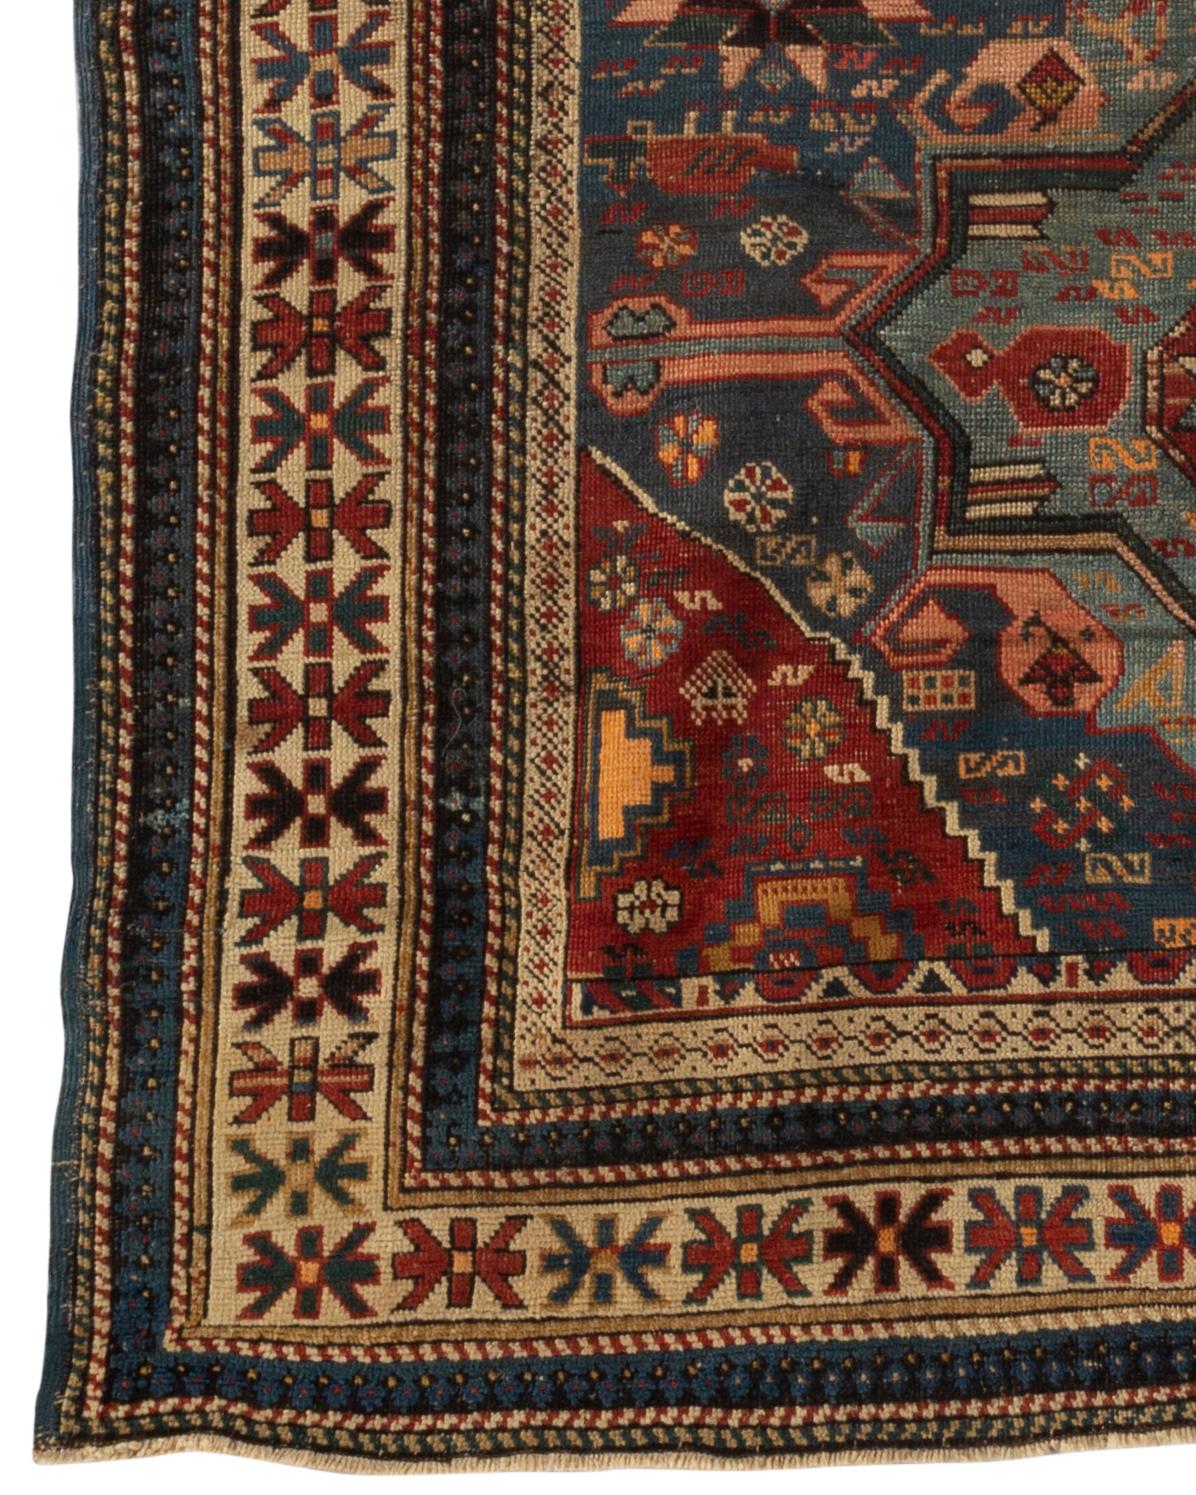 Antique Caucasian Shirvan rug, circa 1880. The field of soft blues with three central motifs all filled with floral and ethnic designs and enclosed within the typical Caucasian multi borders. These types of antique Caucasian rugs were woven in the